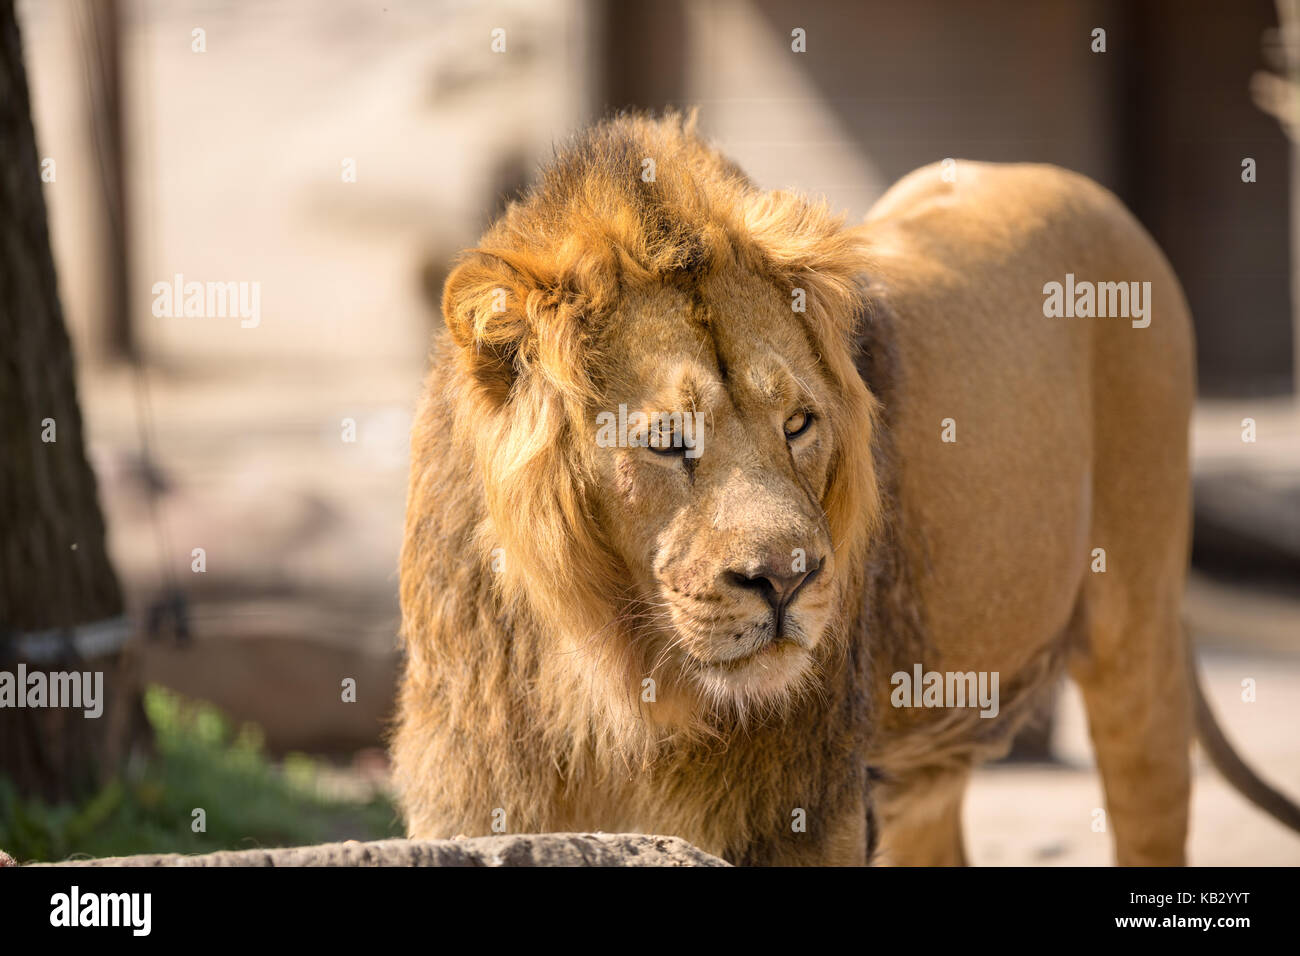 Lion, male big cat walking in sunny day Stock Photo